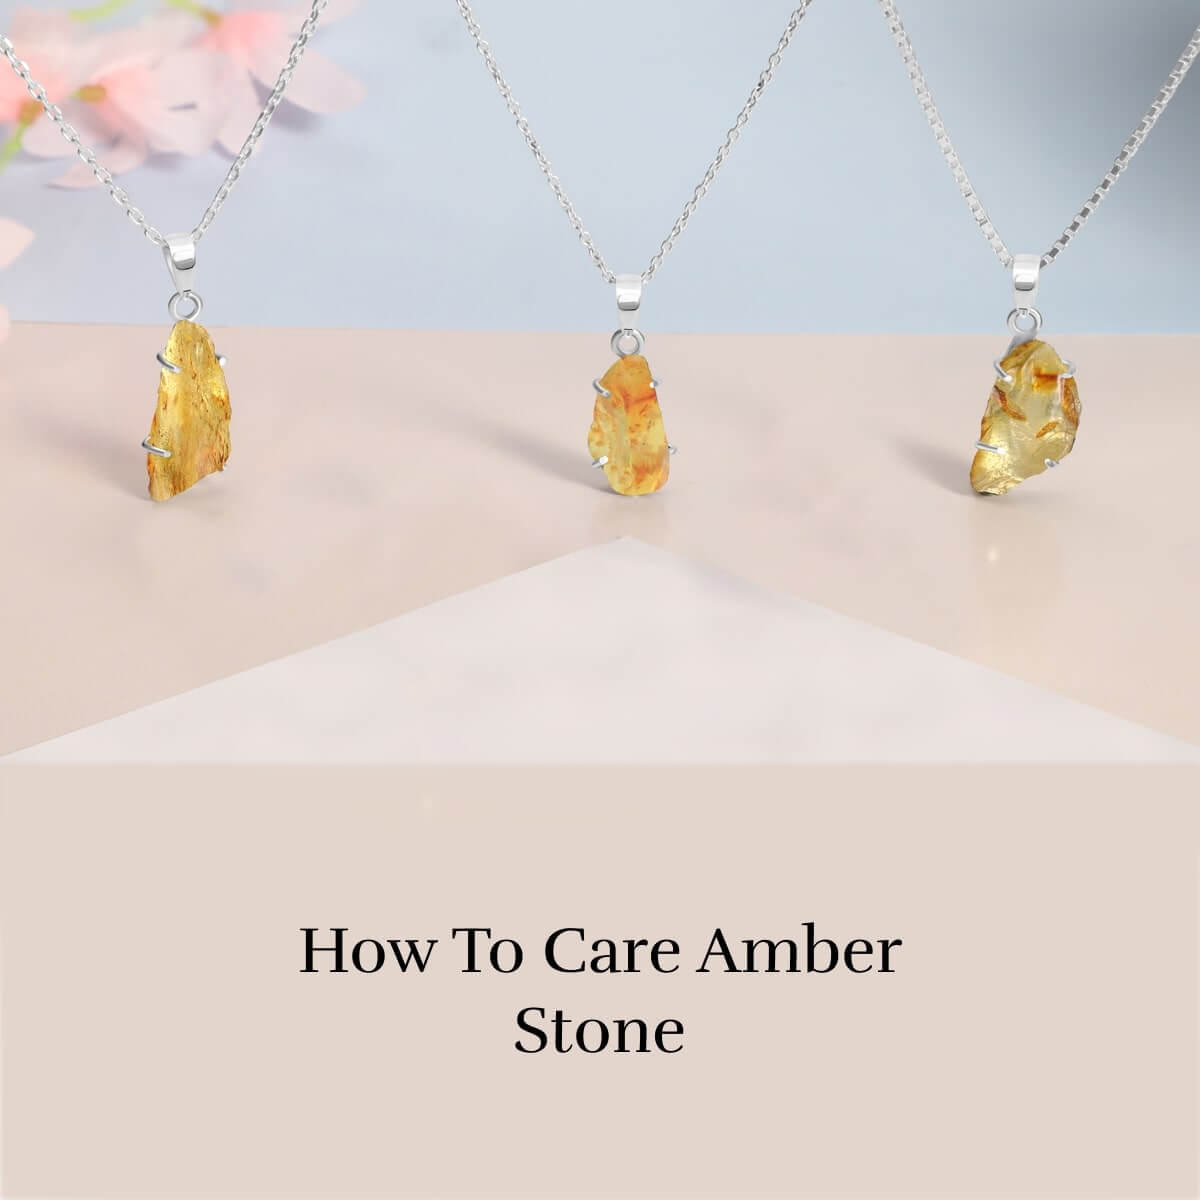 How to Care Of Amber